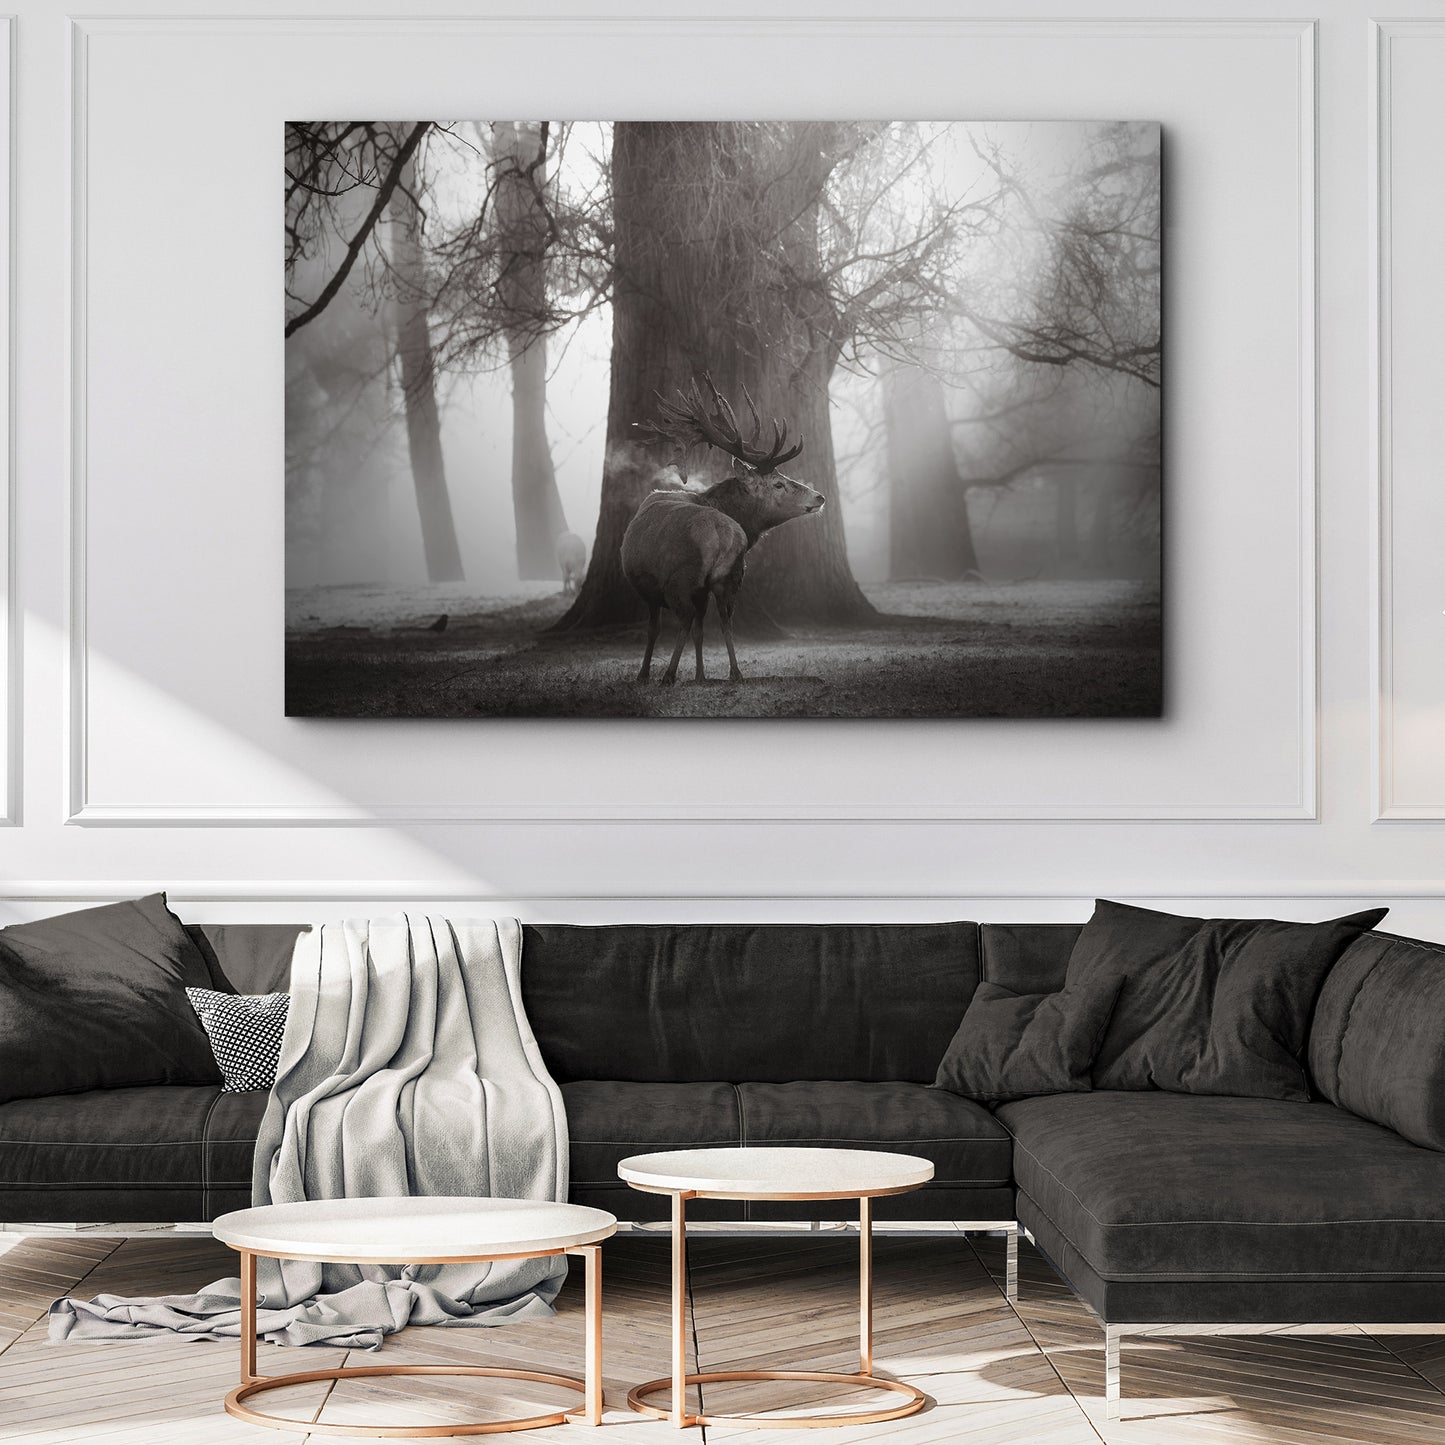 Monochrome Deer Canvas Wall Art Style 2 - Image by Tailored Canvases